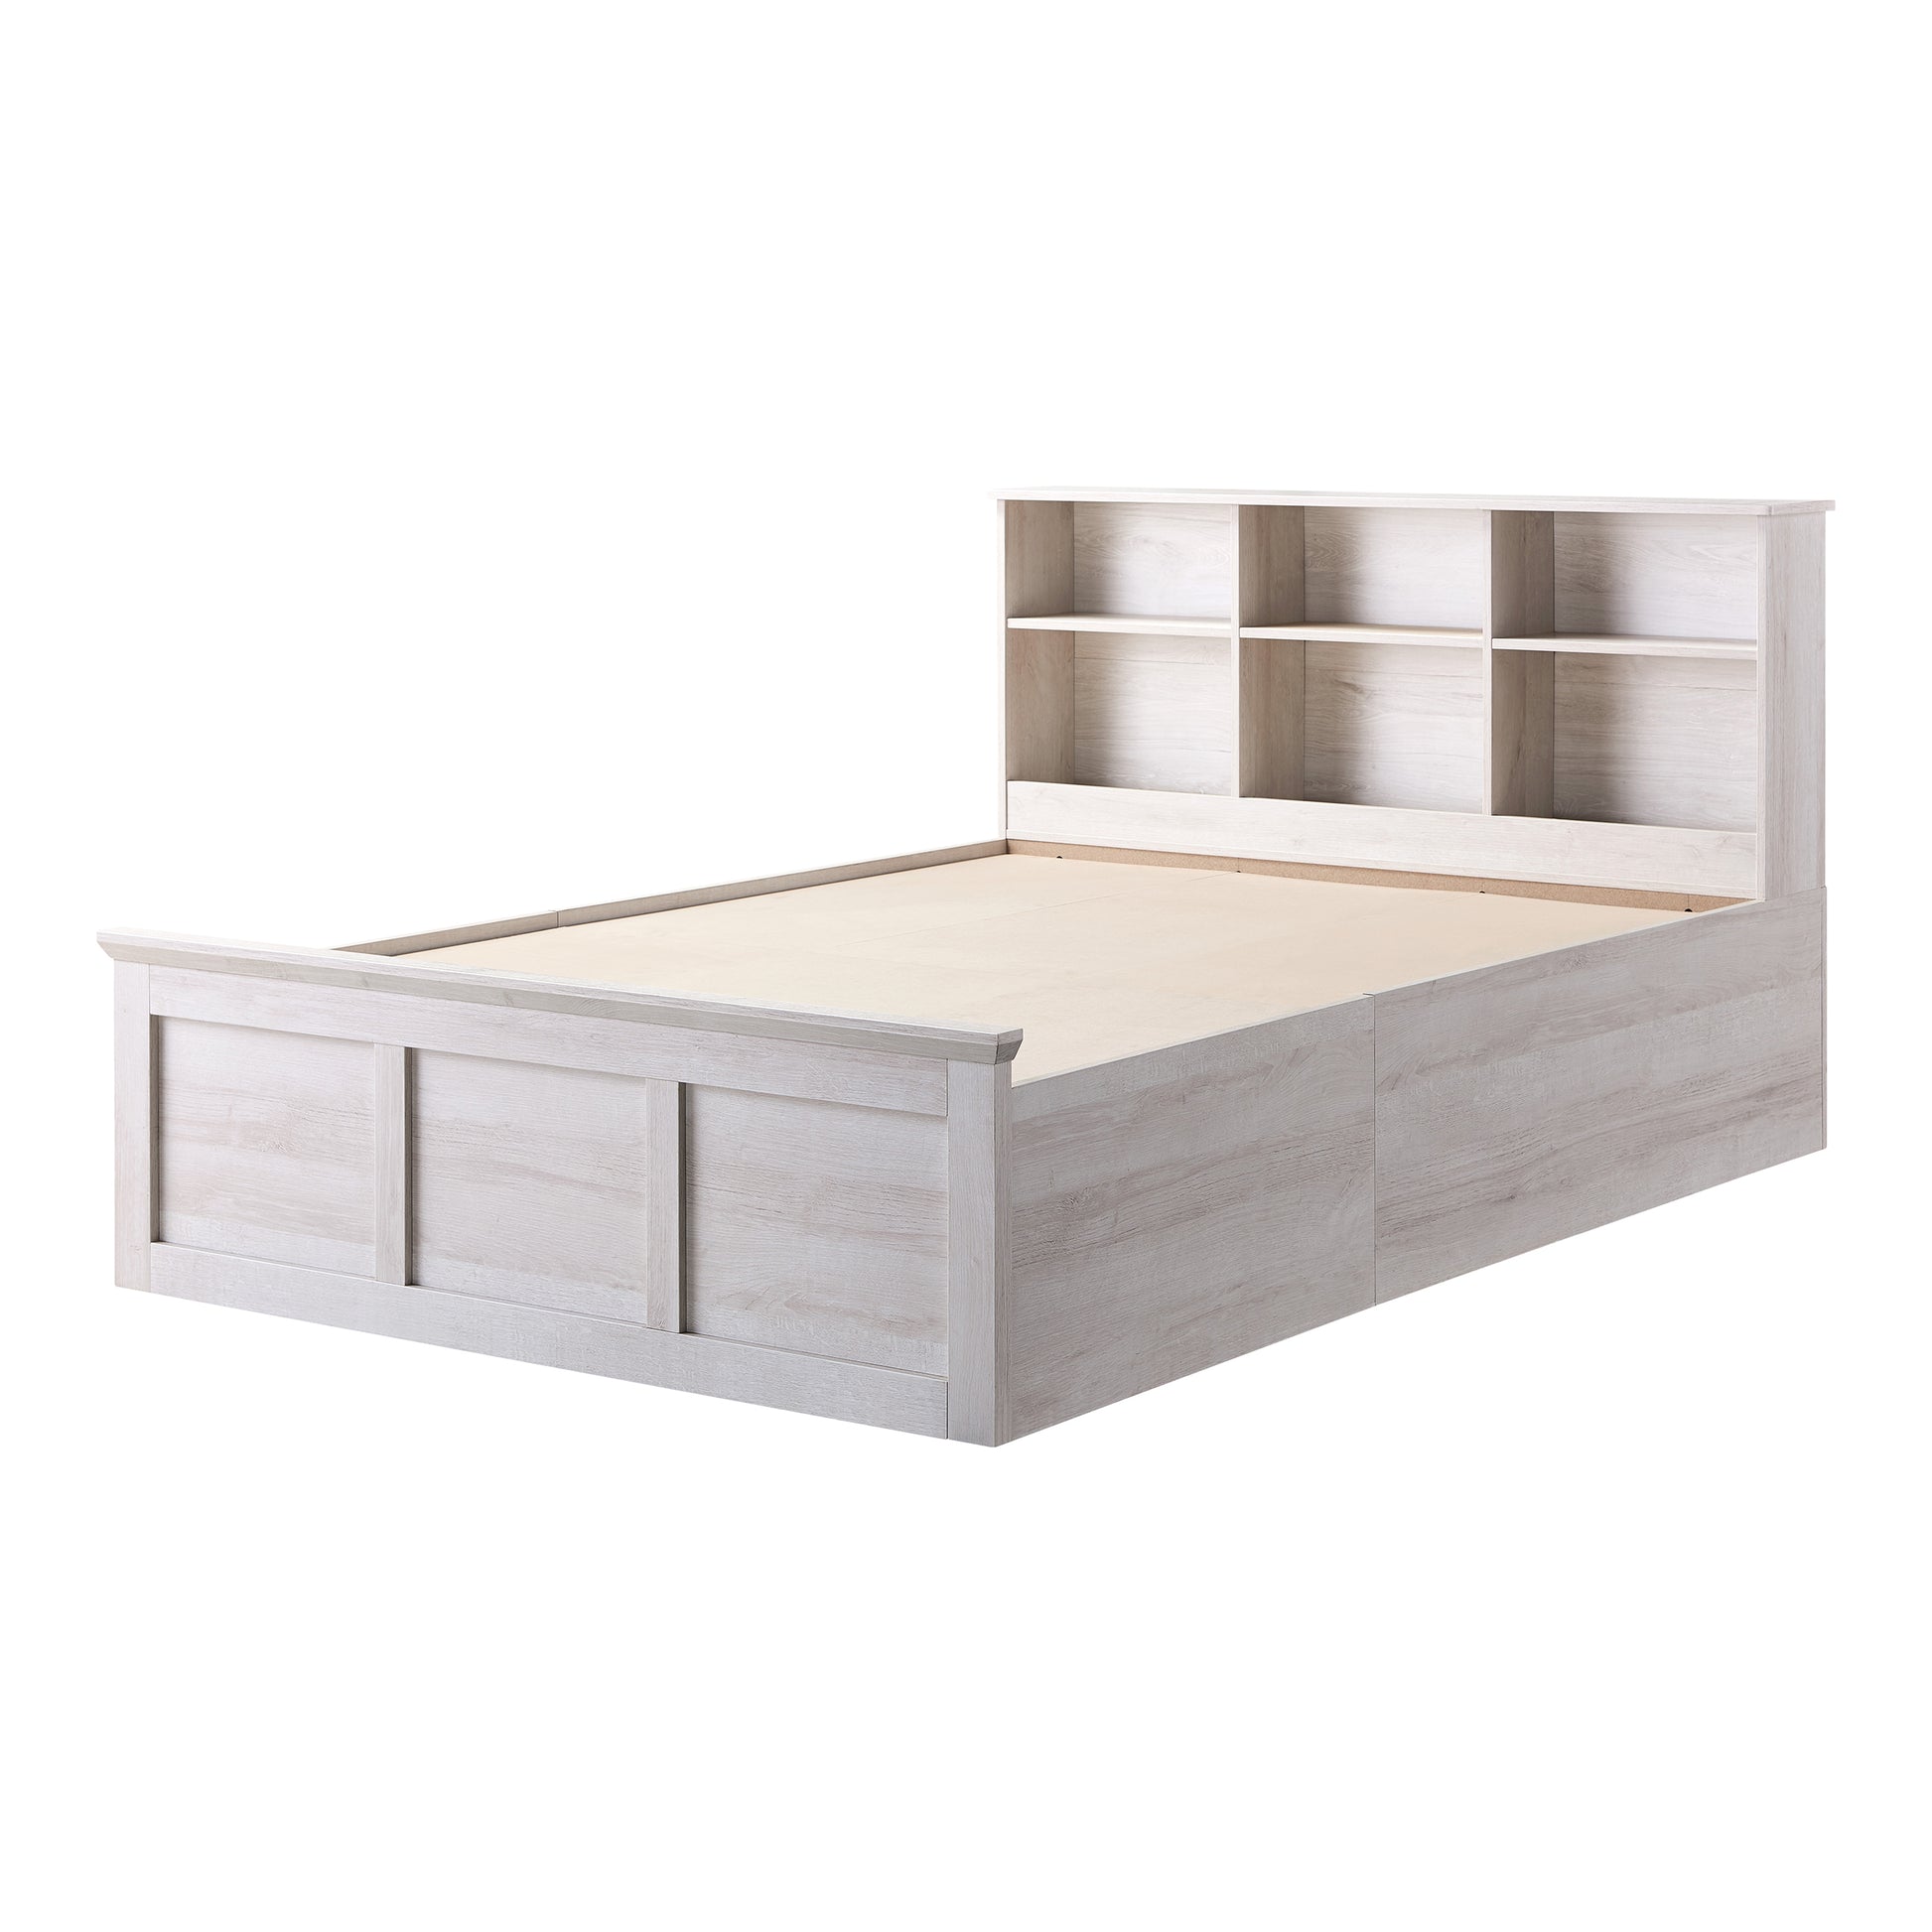 Left angled transitional white two-drawer four-shelf storage bed shown with optional bookcase headboard on a white background